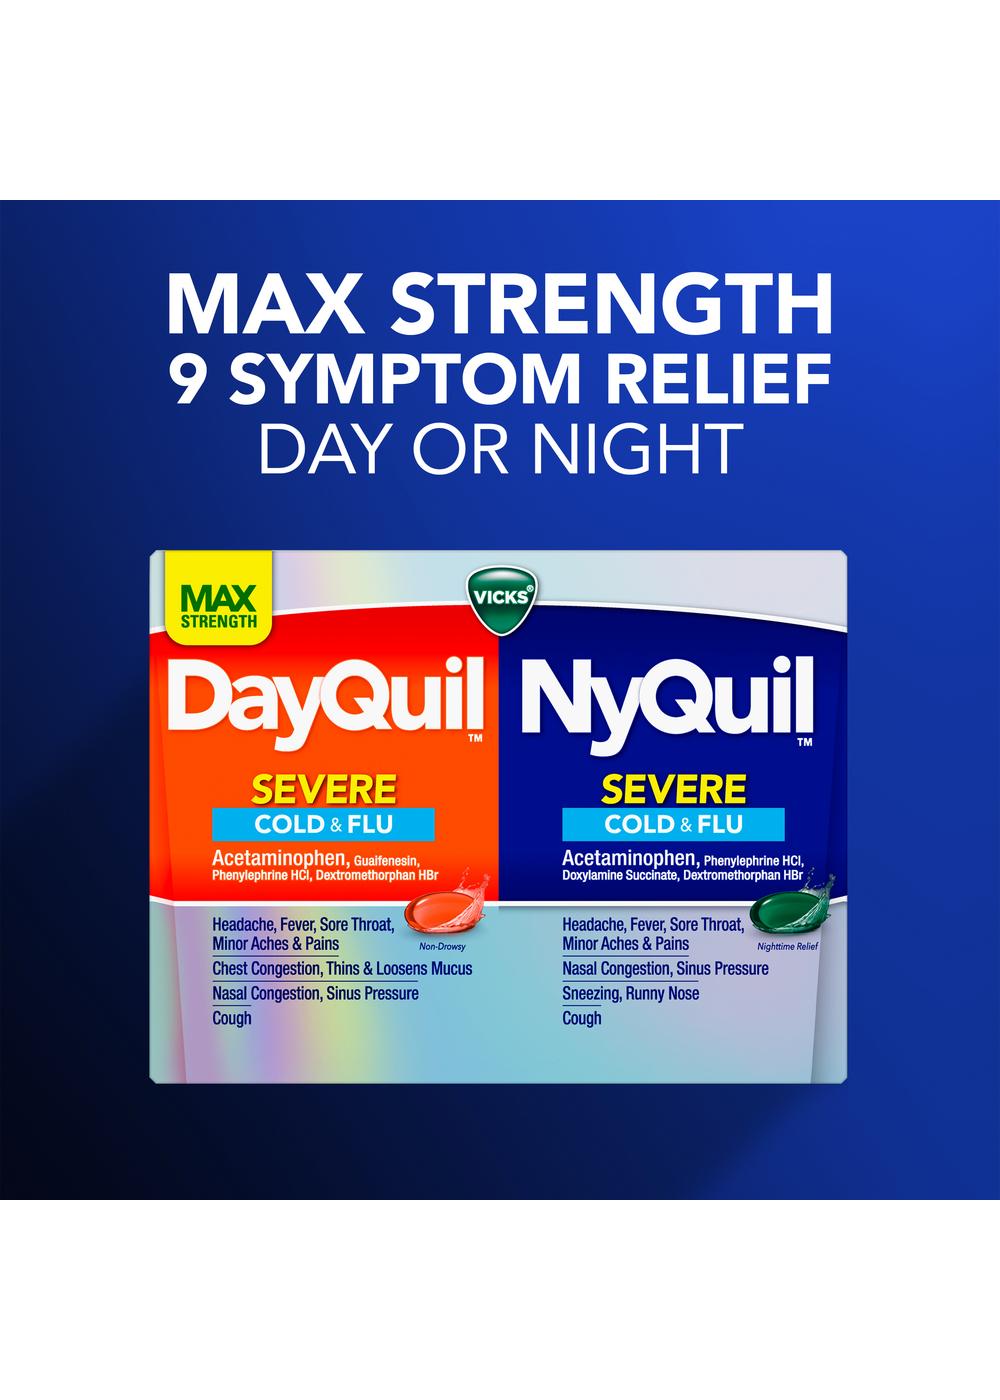 Vicks DayQuil + NyQuil SEVERE Cold & Flu Combo Pack; image 2 of 9